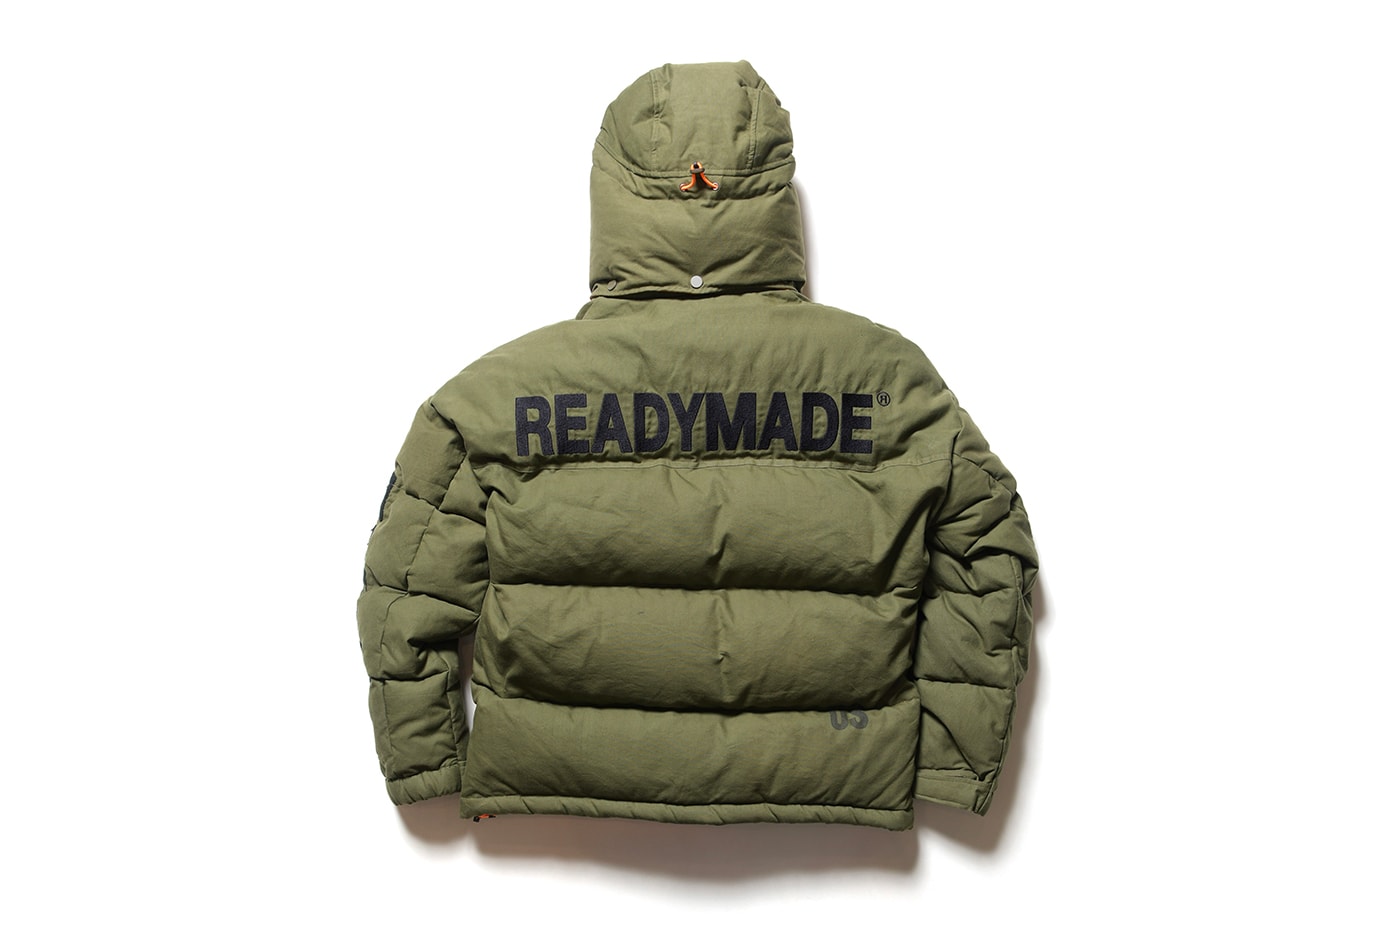 FC Real Bristol READYMADE 20 Anniversary Collection bearbrick medicom toy us army utilitarian jackets homeware box fall winter 2019 collaborations japanese